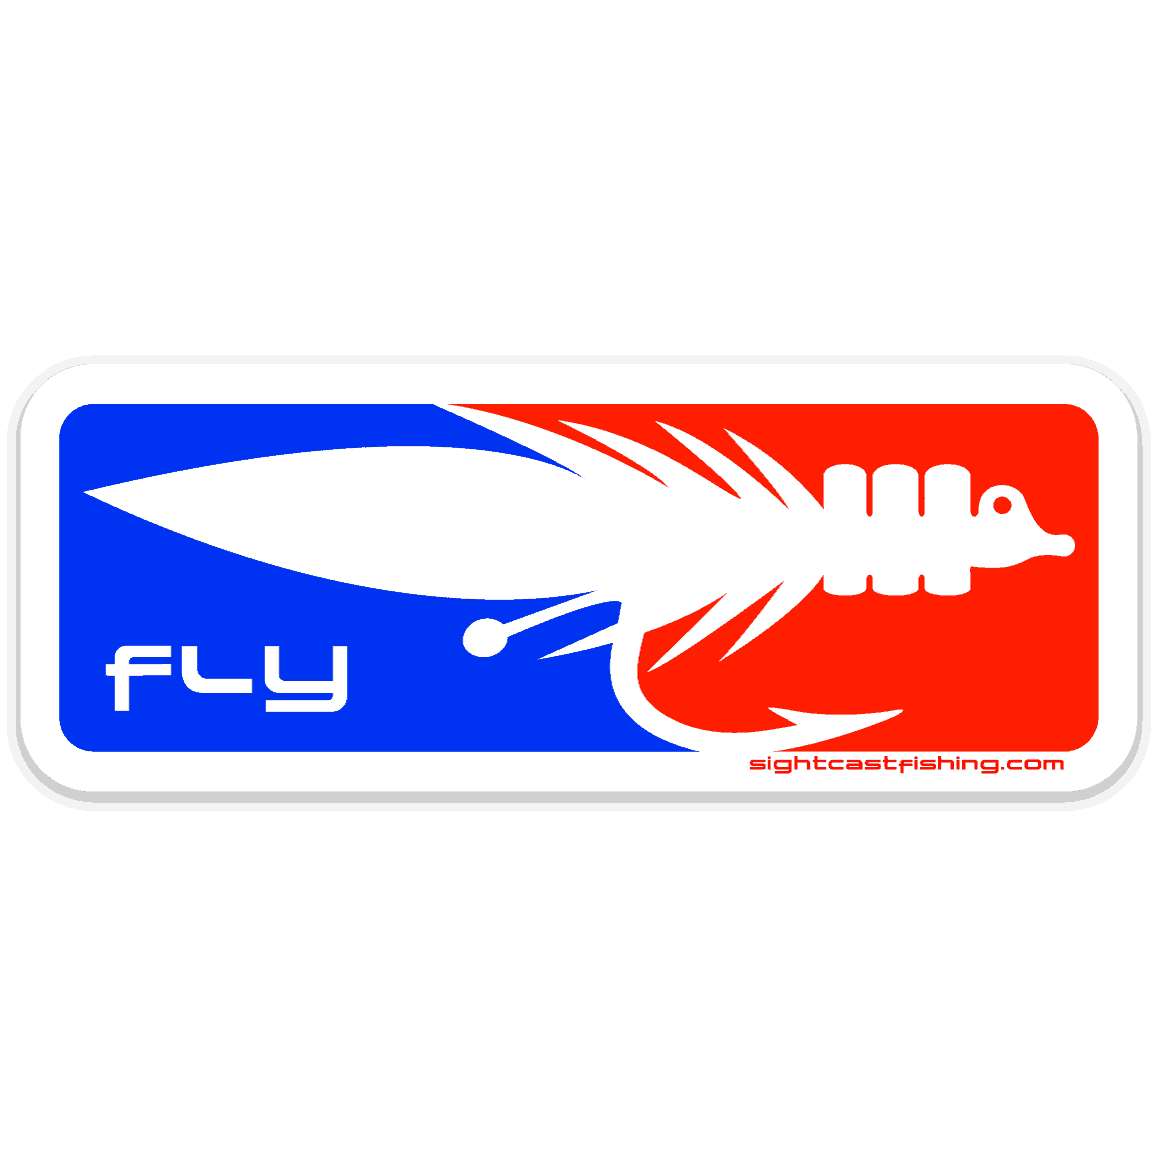 Sight Cast Fishing Company Horizontal Logo Sticker - Fly Slaps Fly Fishing  Stickers and Decals